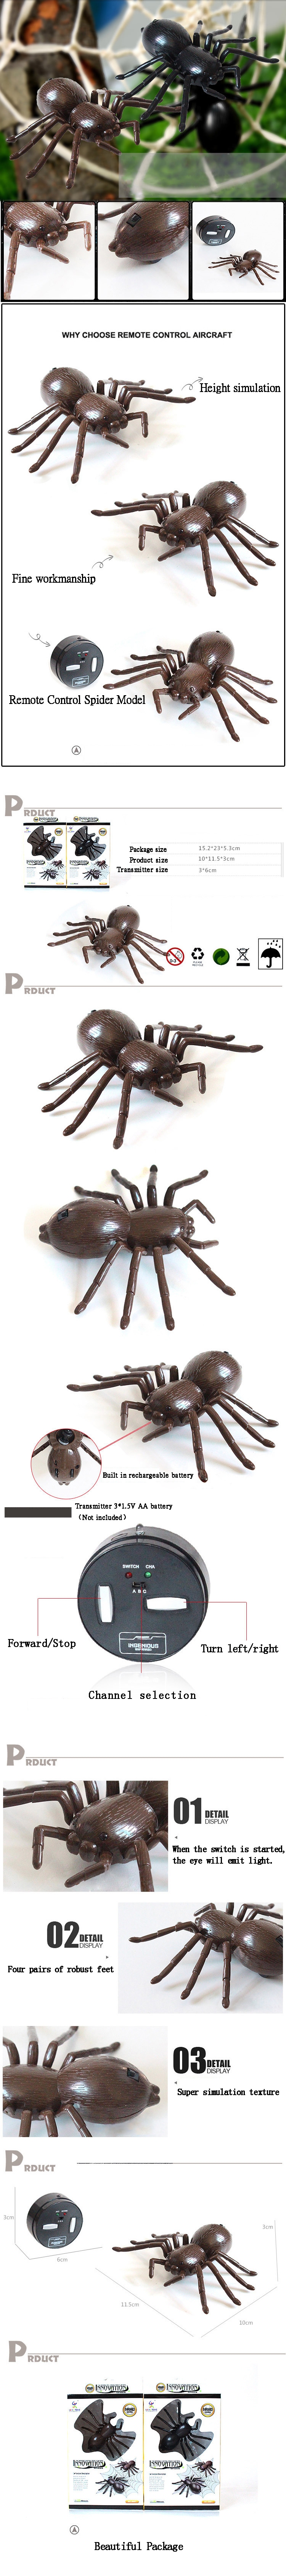 Remote Control Spider Model Toy for Kids Two Colors